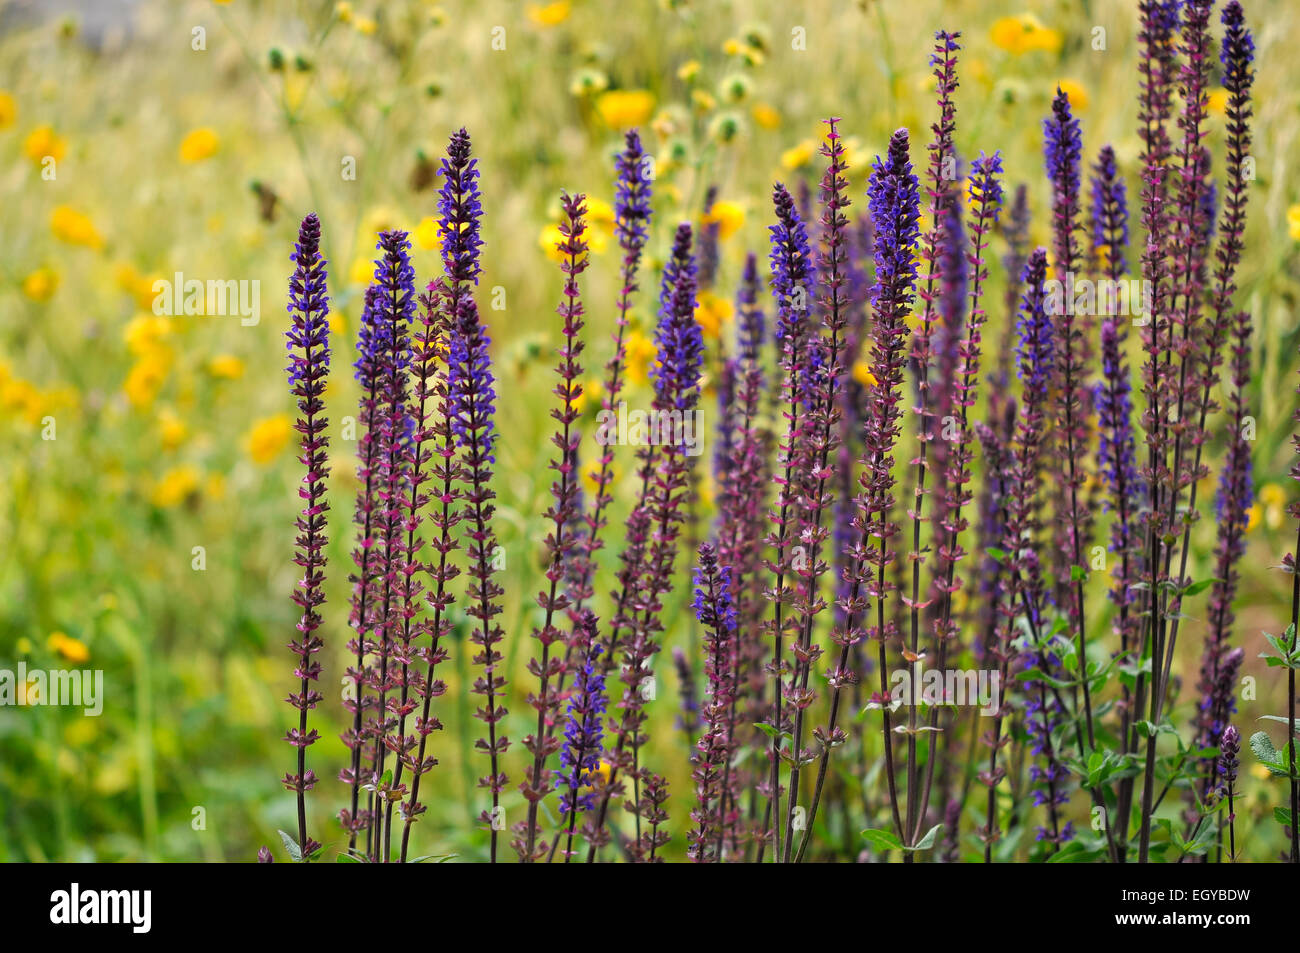 Deep blue/violet flowers of Salvia Superba contrasting against a yelow backgruond of Geum flowers. Stock Photo